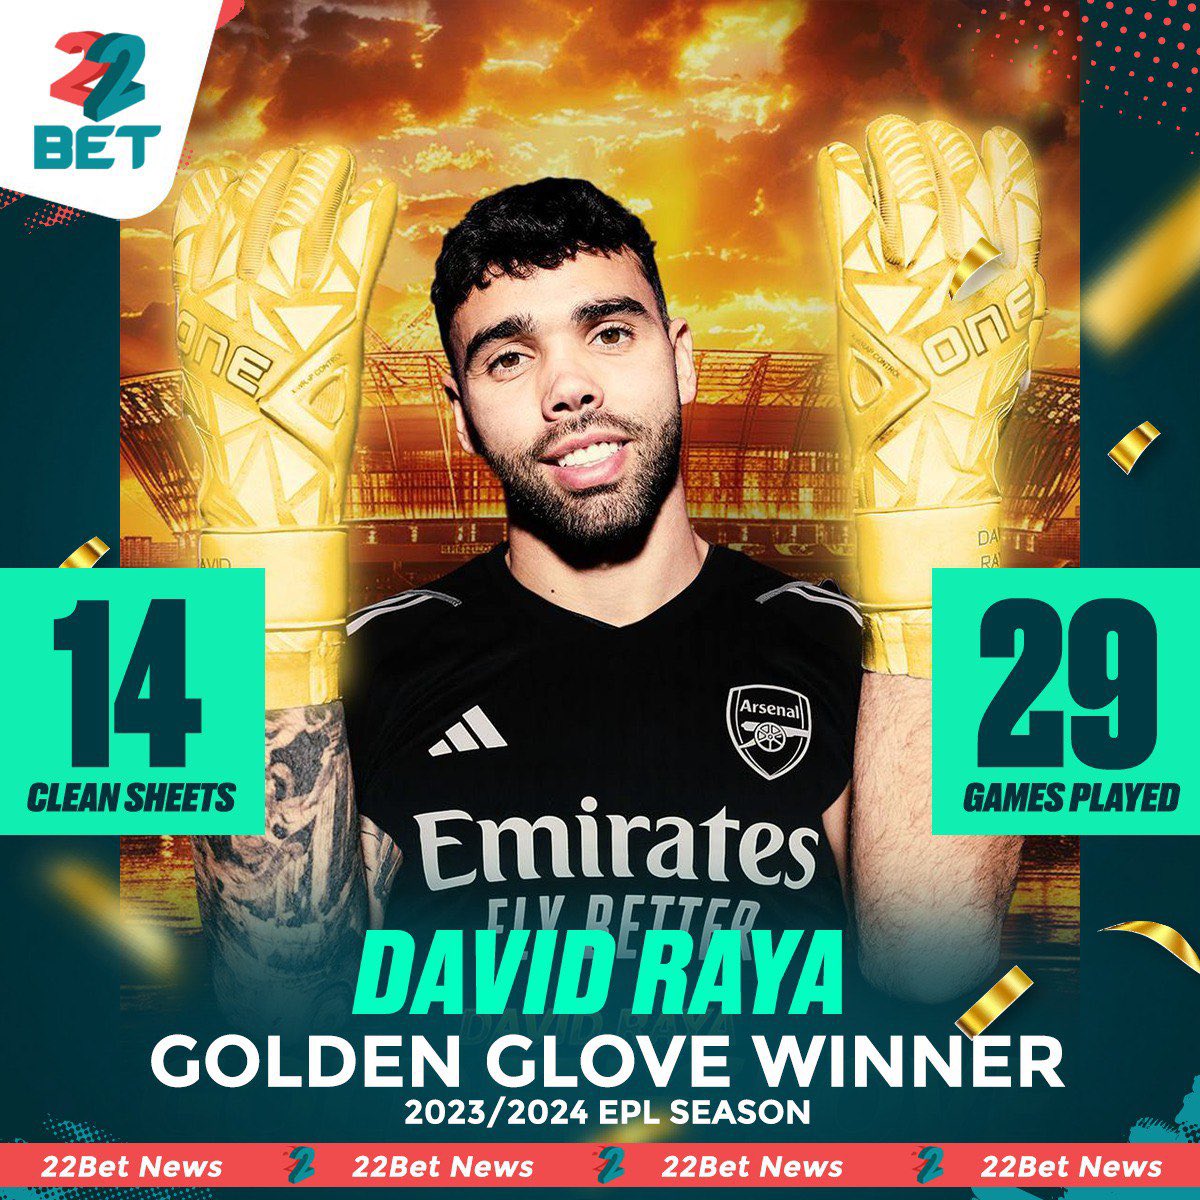 David #Raya is set to become the 2023/24 #PremierLeague Golden Glove 🧤 winner He will be the first #Arsenal keeper to win it in 8️⃣ years since Petr Čech 👏🏾 #22Bet #Bestodds #Switchto22Bet #Dundana22bet